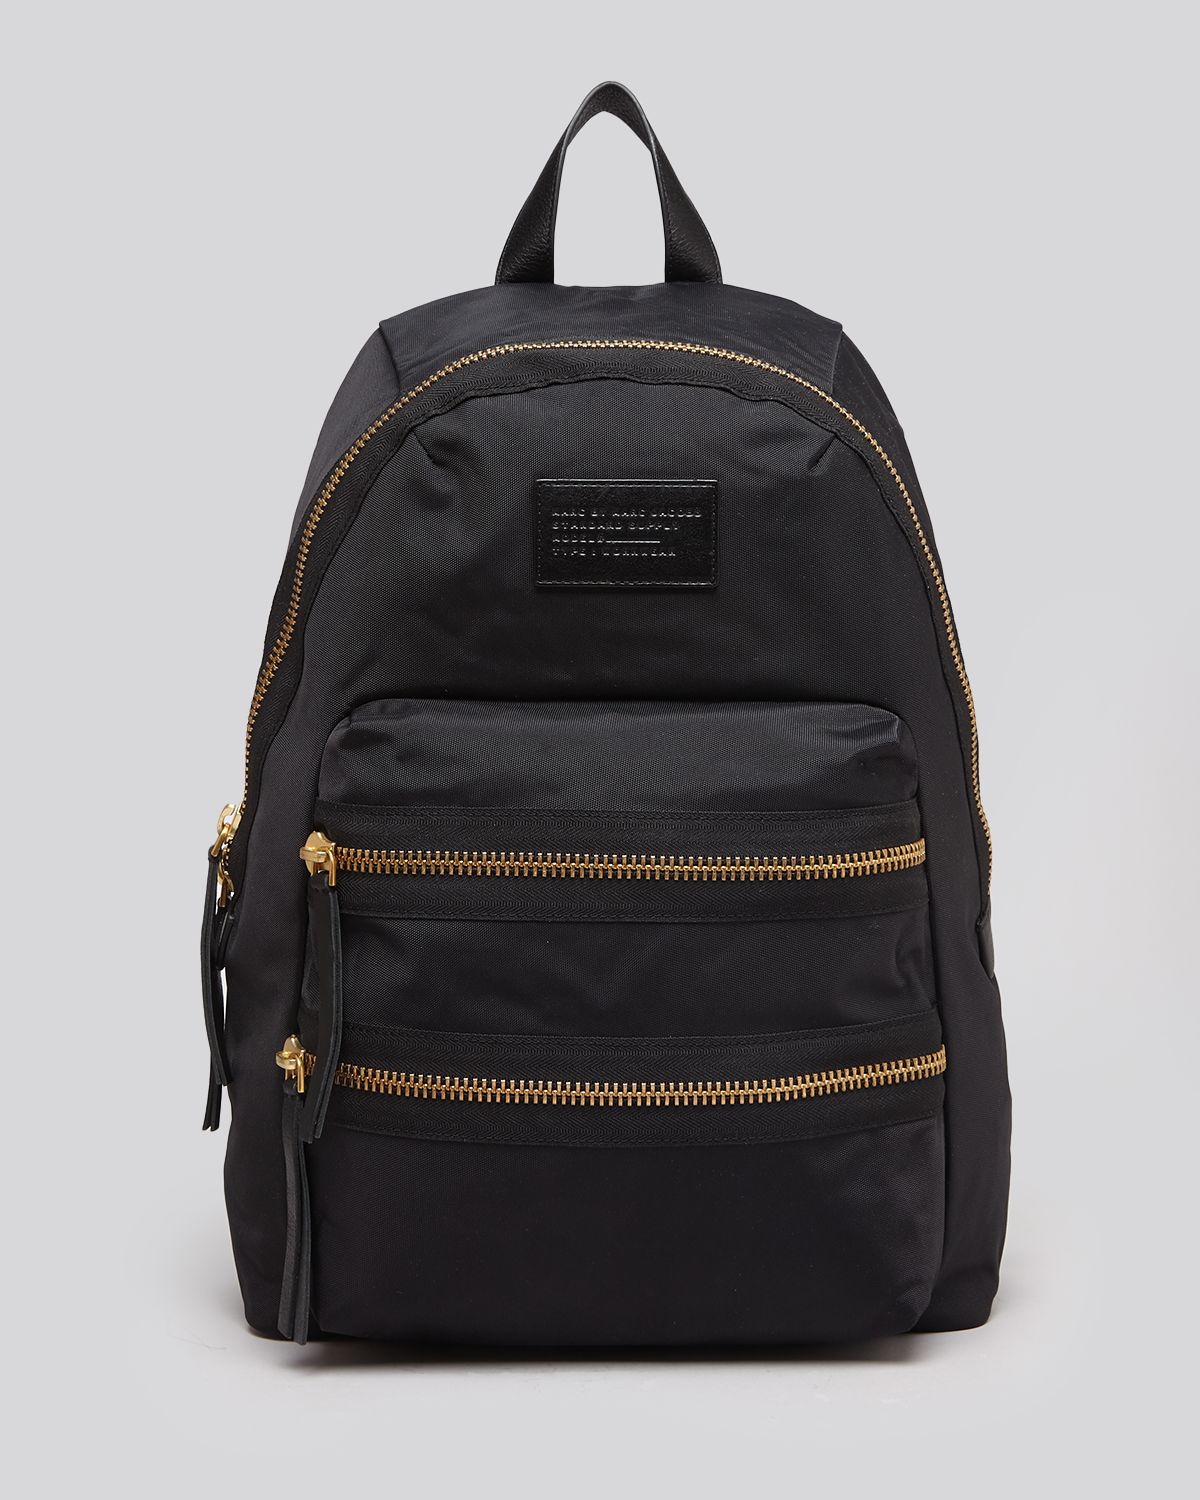 Marc by marc jacobs Backpack - Domo Arigato Packrat in Black | Lyst